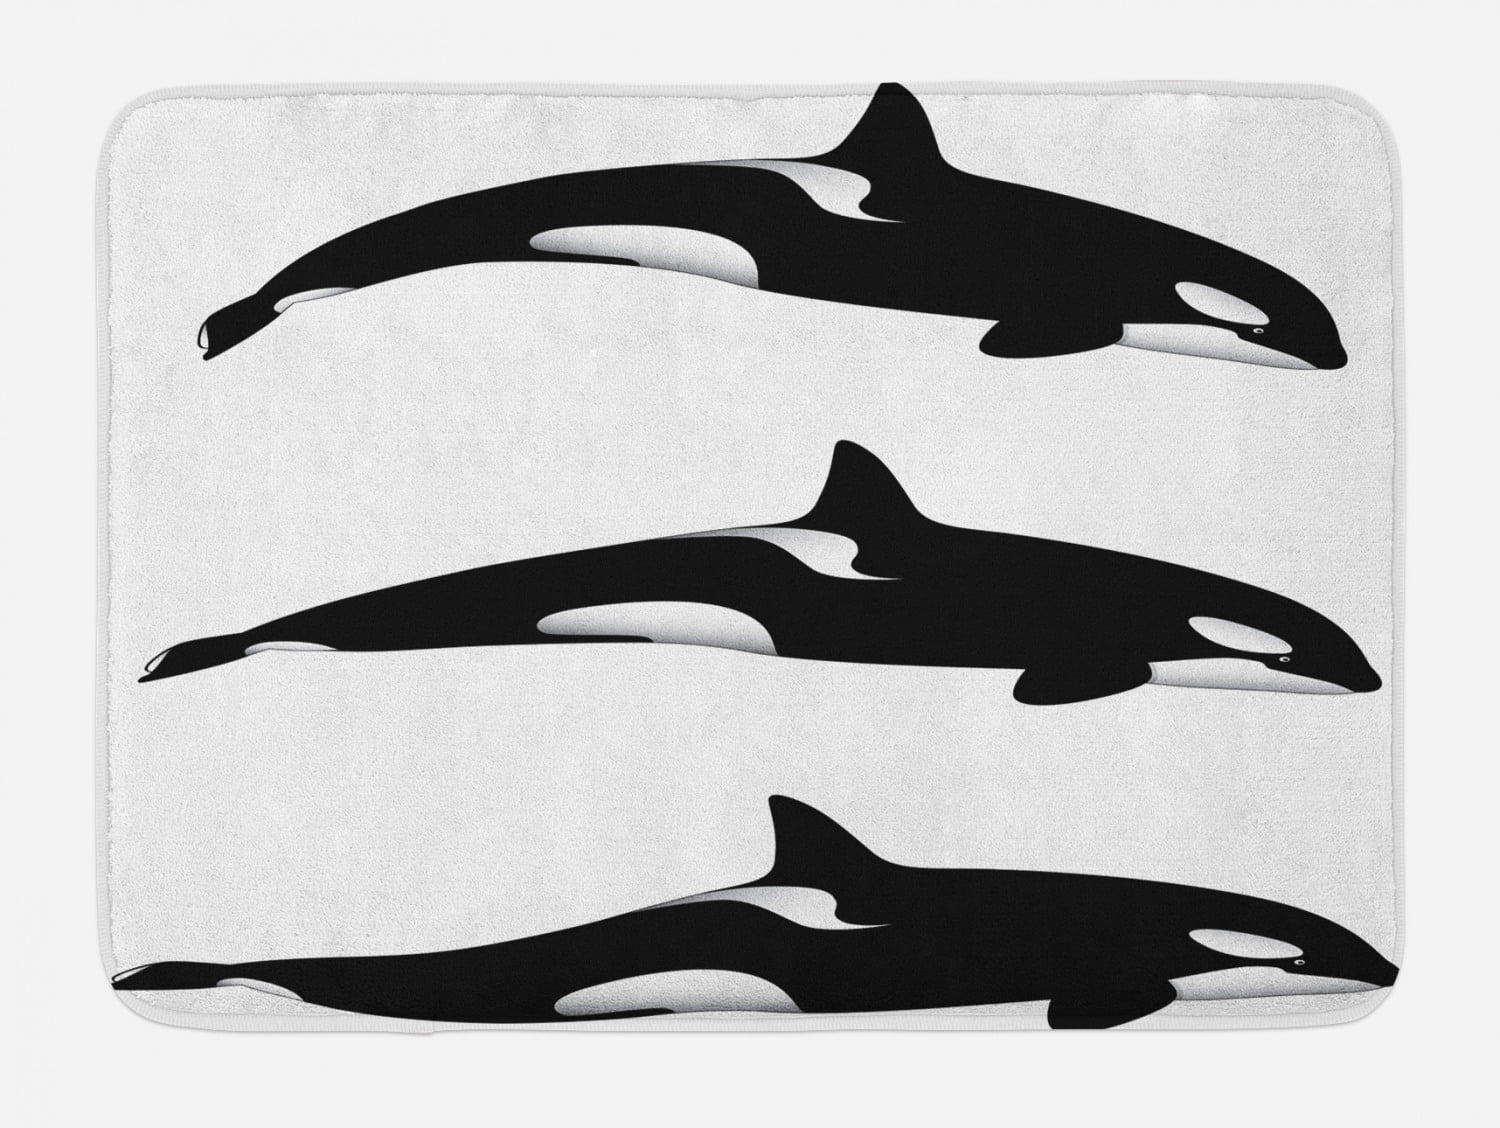 New Set of 10 SMALL Glass Orca Whale Magnets Refrigerator Crafts Black White 